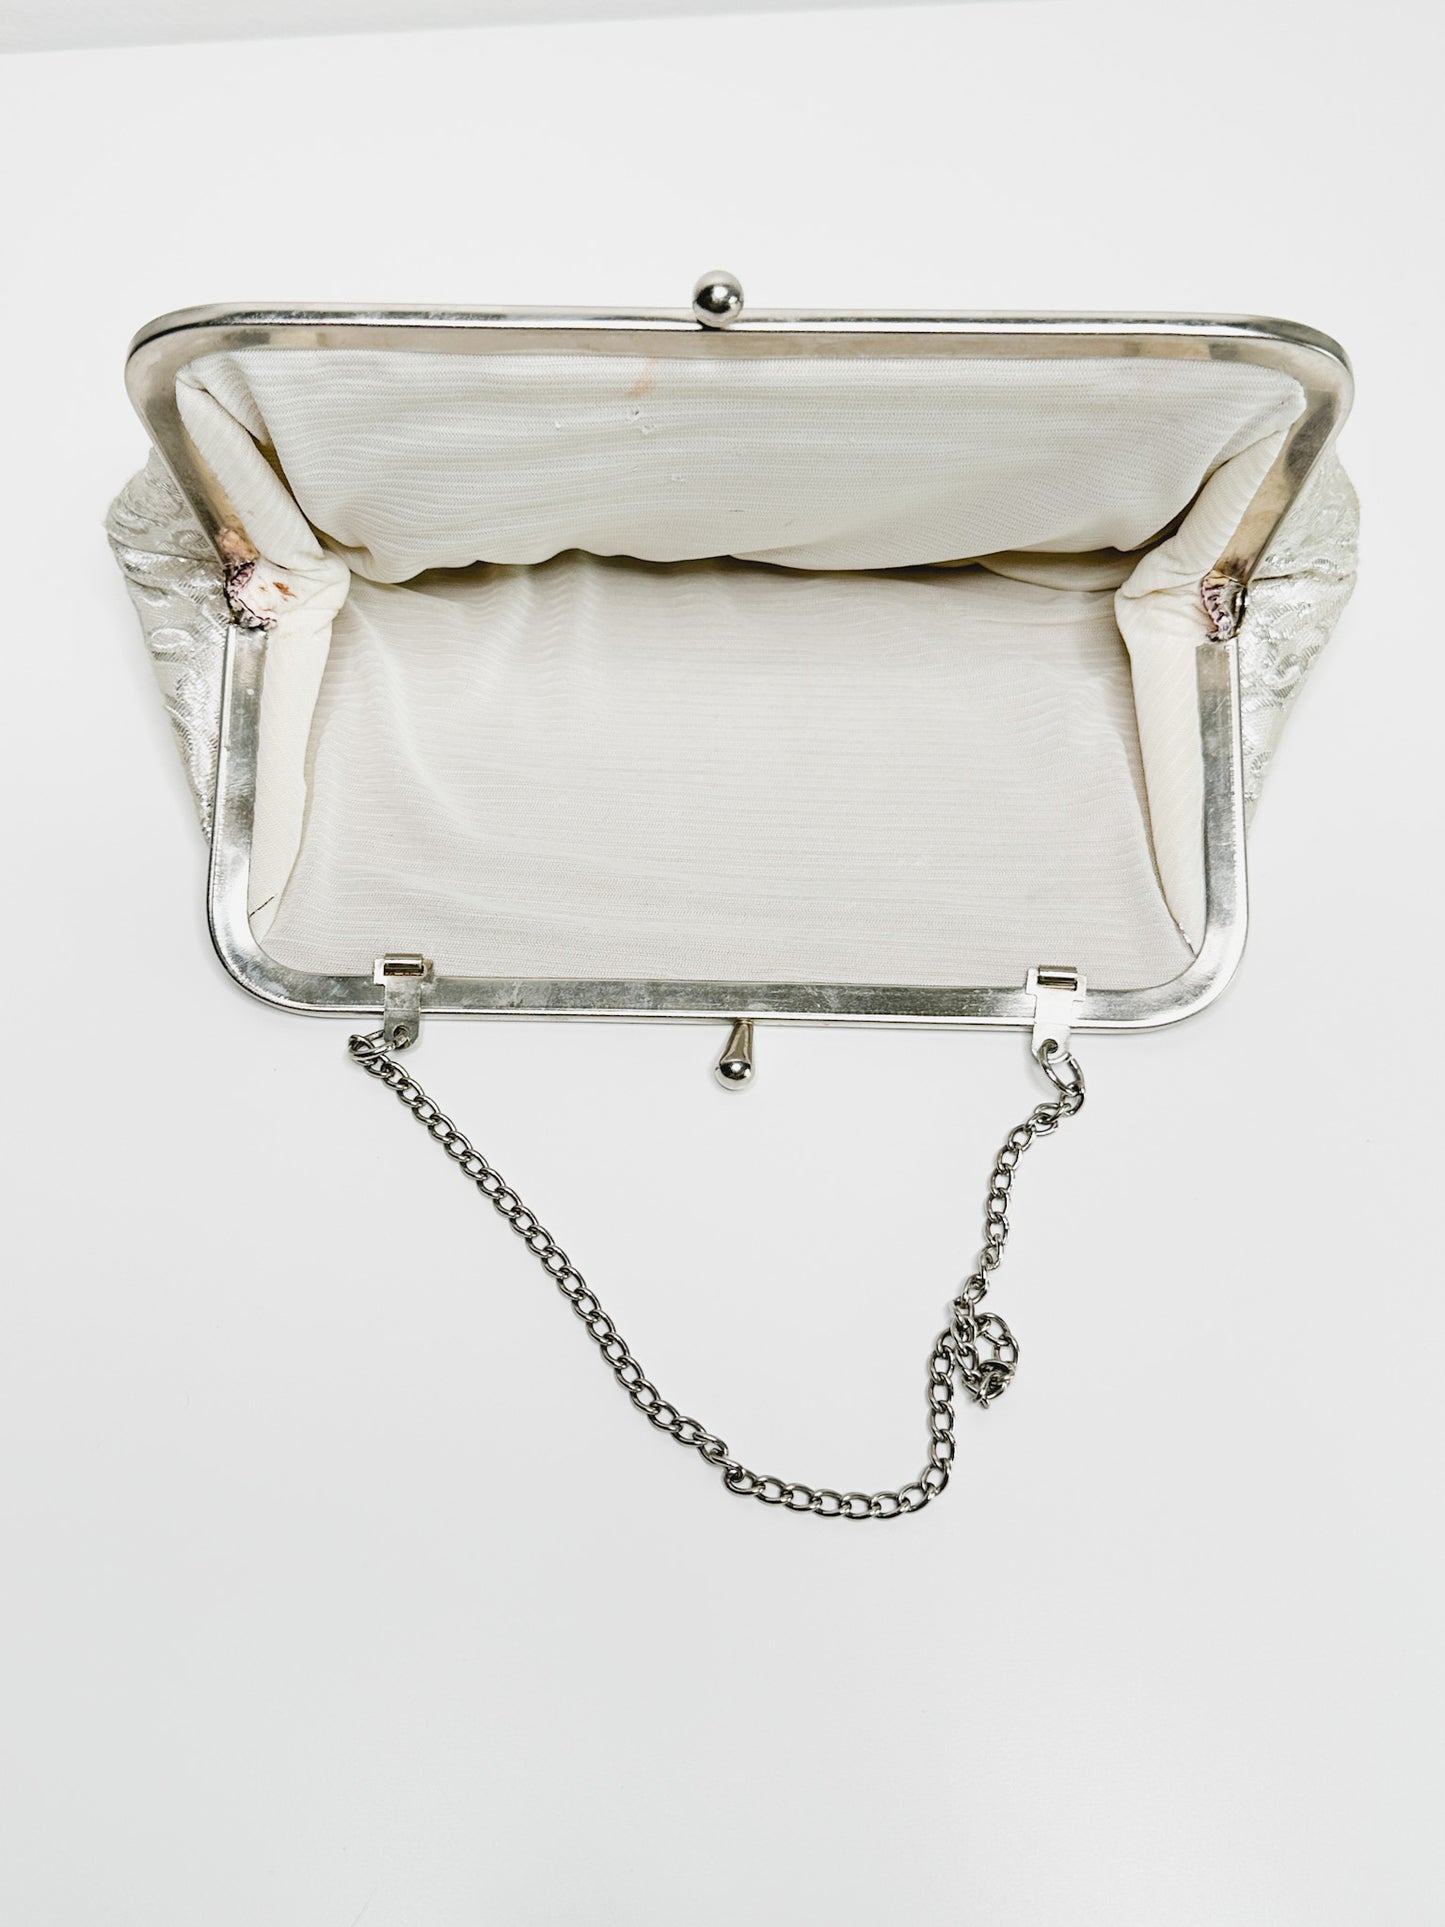 Cocktail Evening Purse with silver detailing.